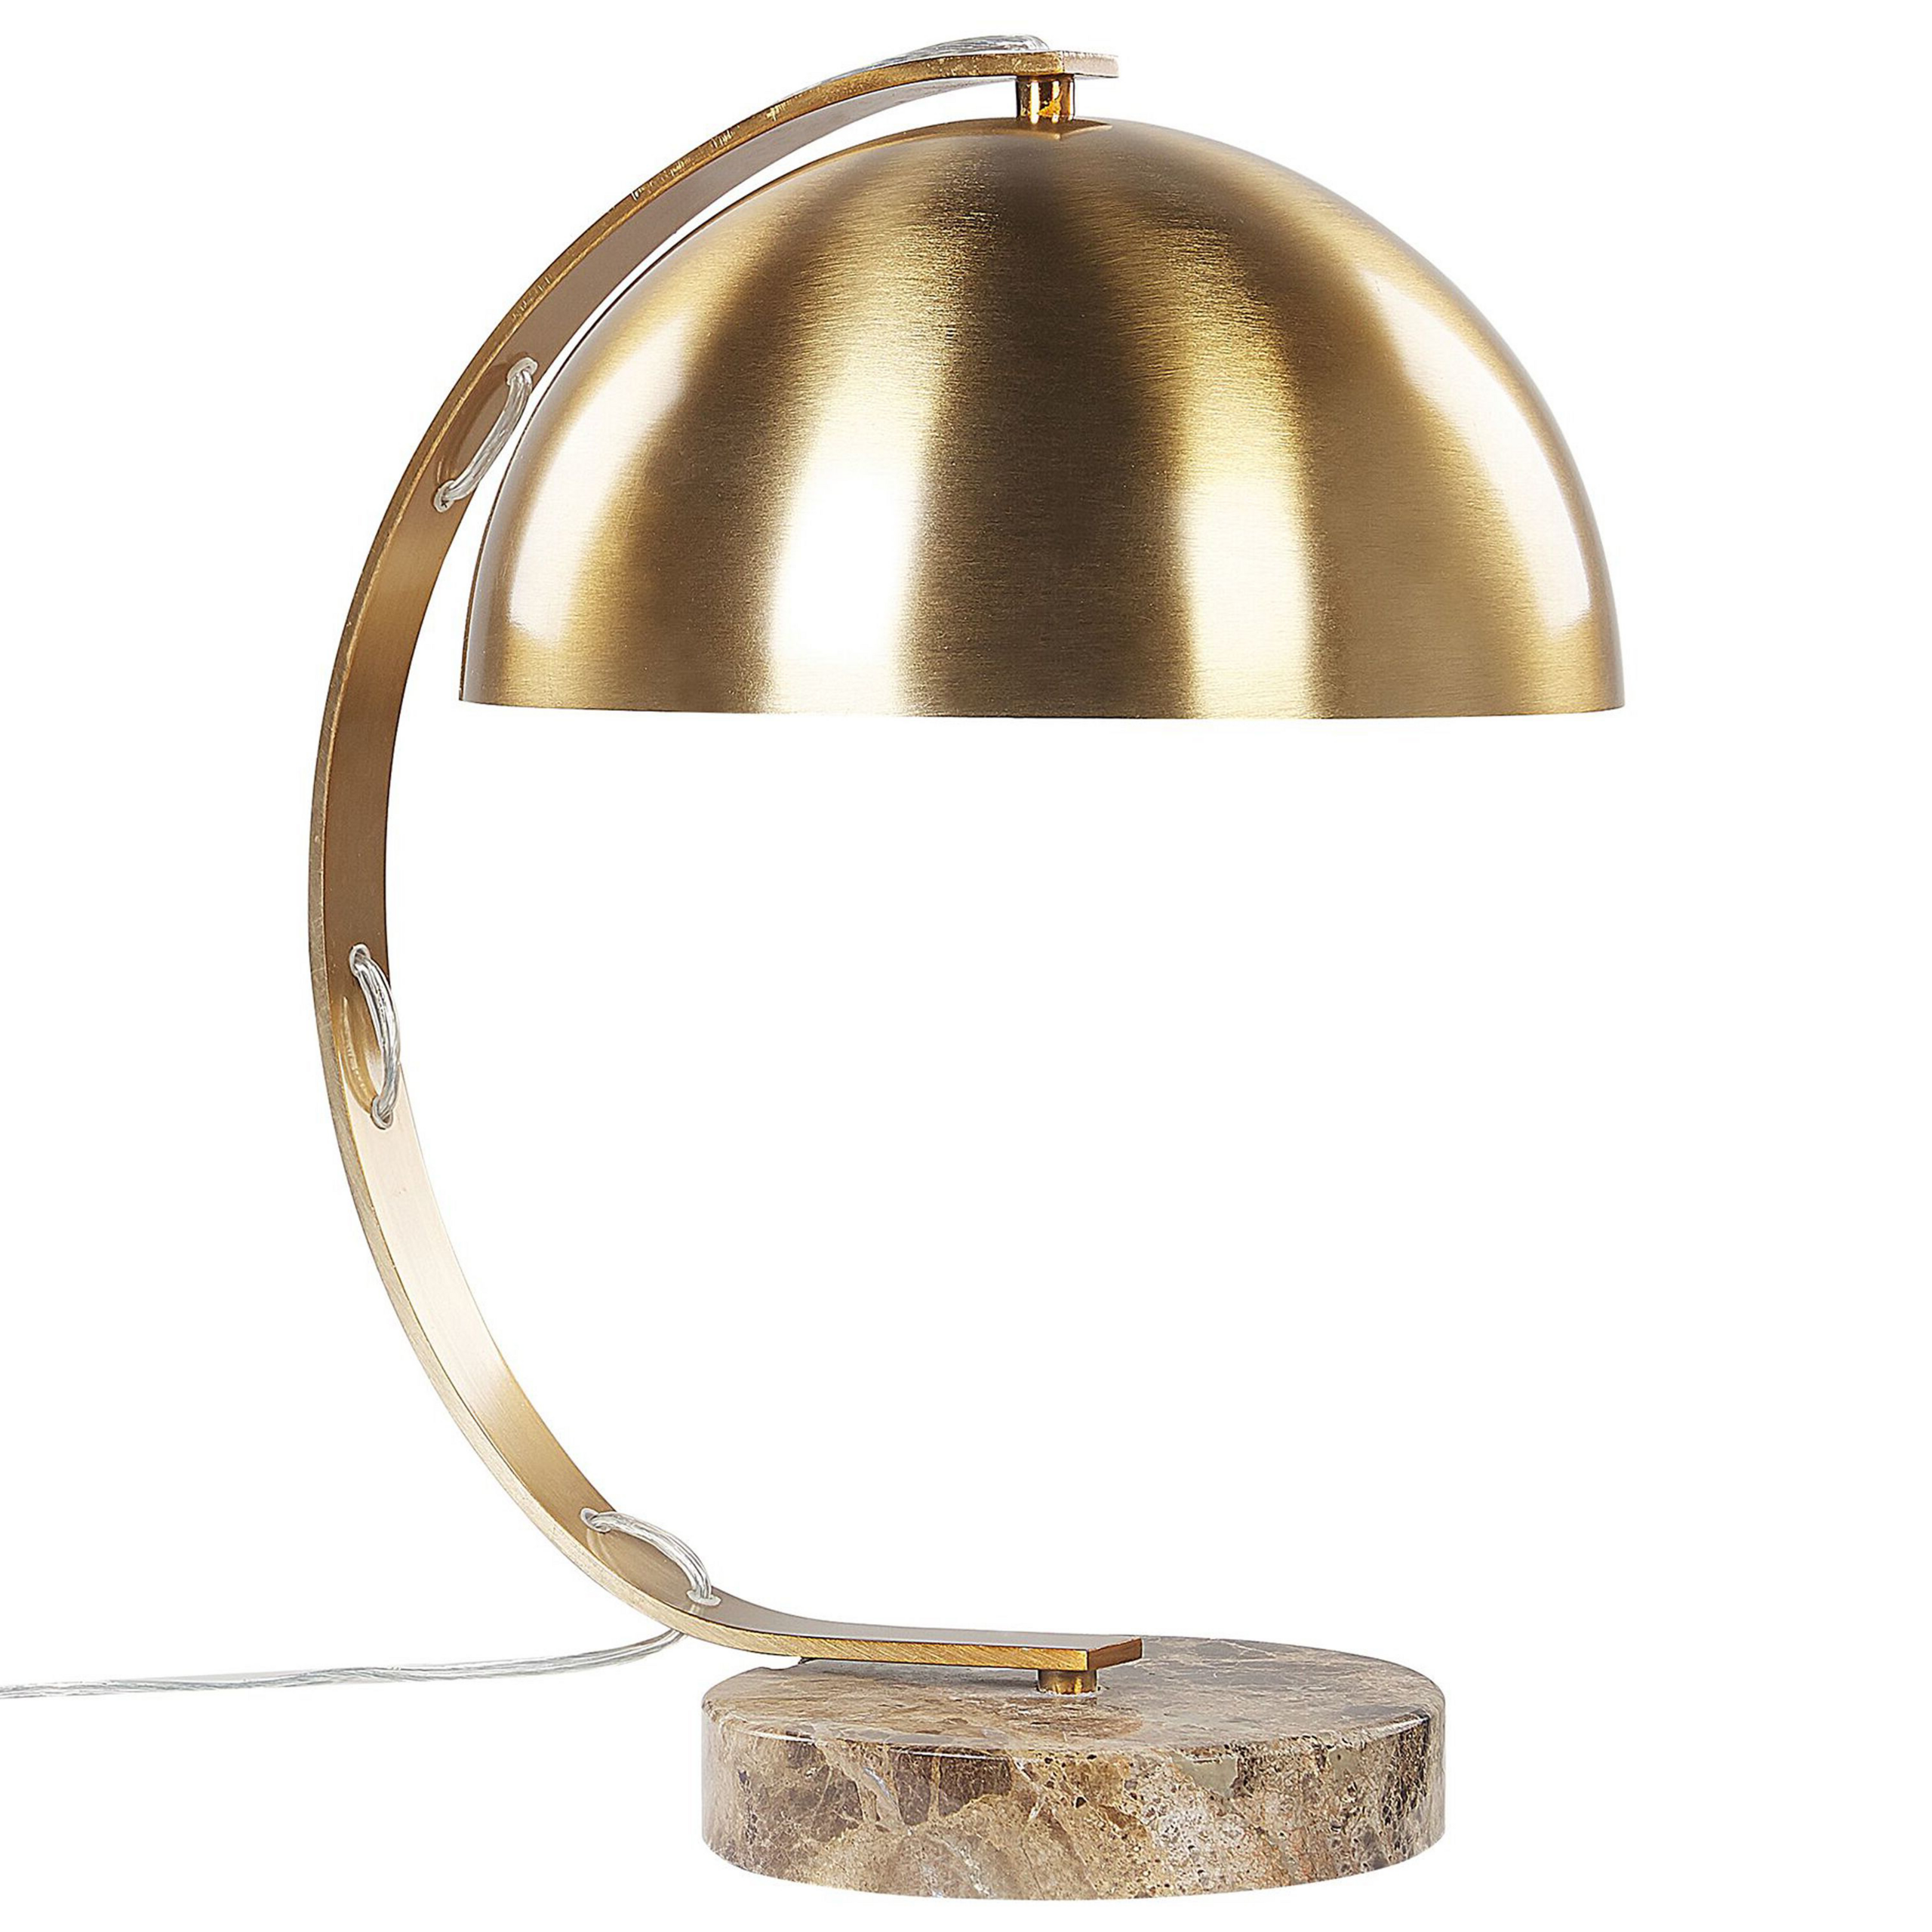 Beliani Table Lamp Gold Metal Shade Curved Arched Arm Marble Base Art Deco Bedside Light